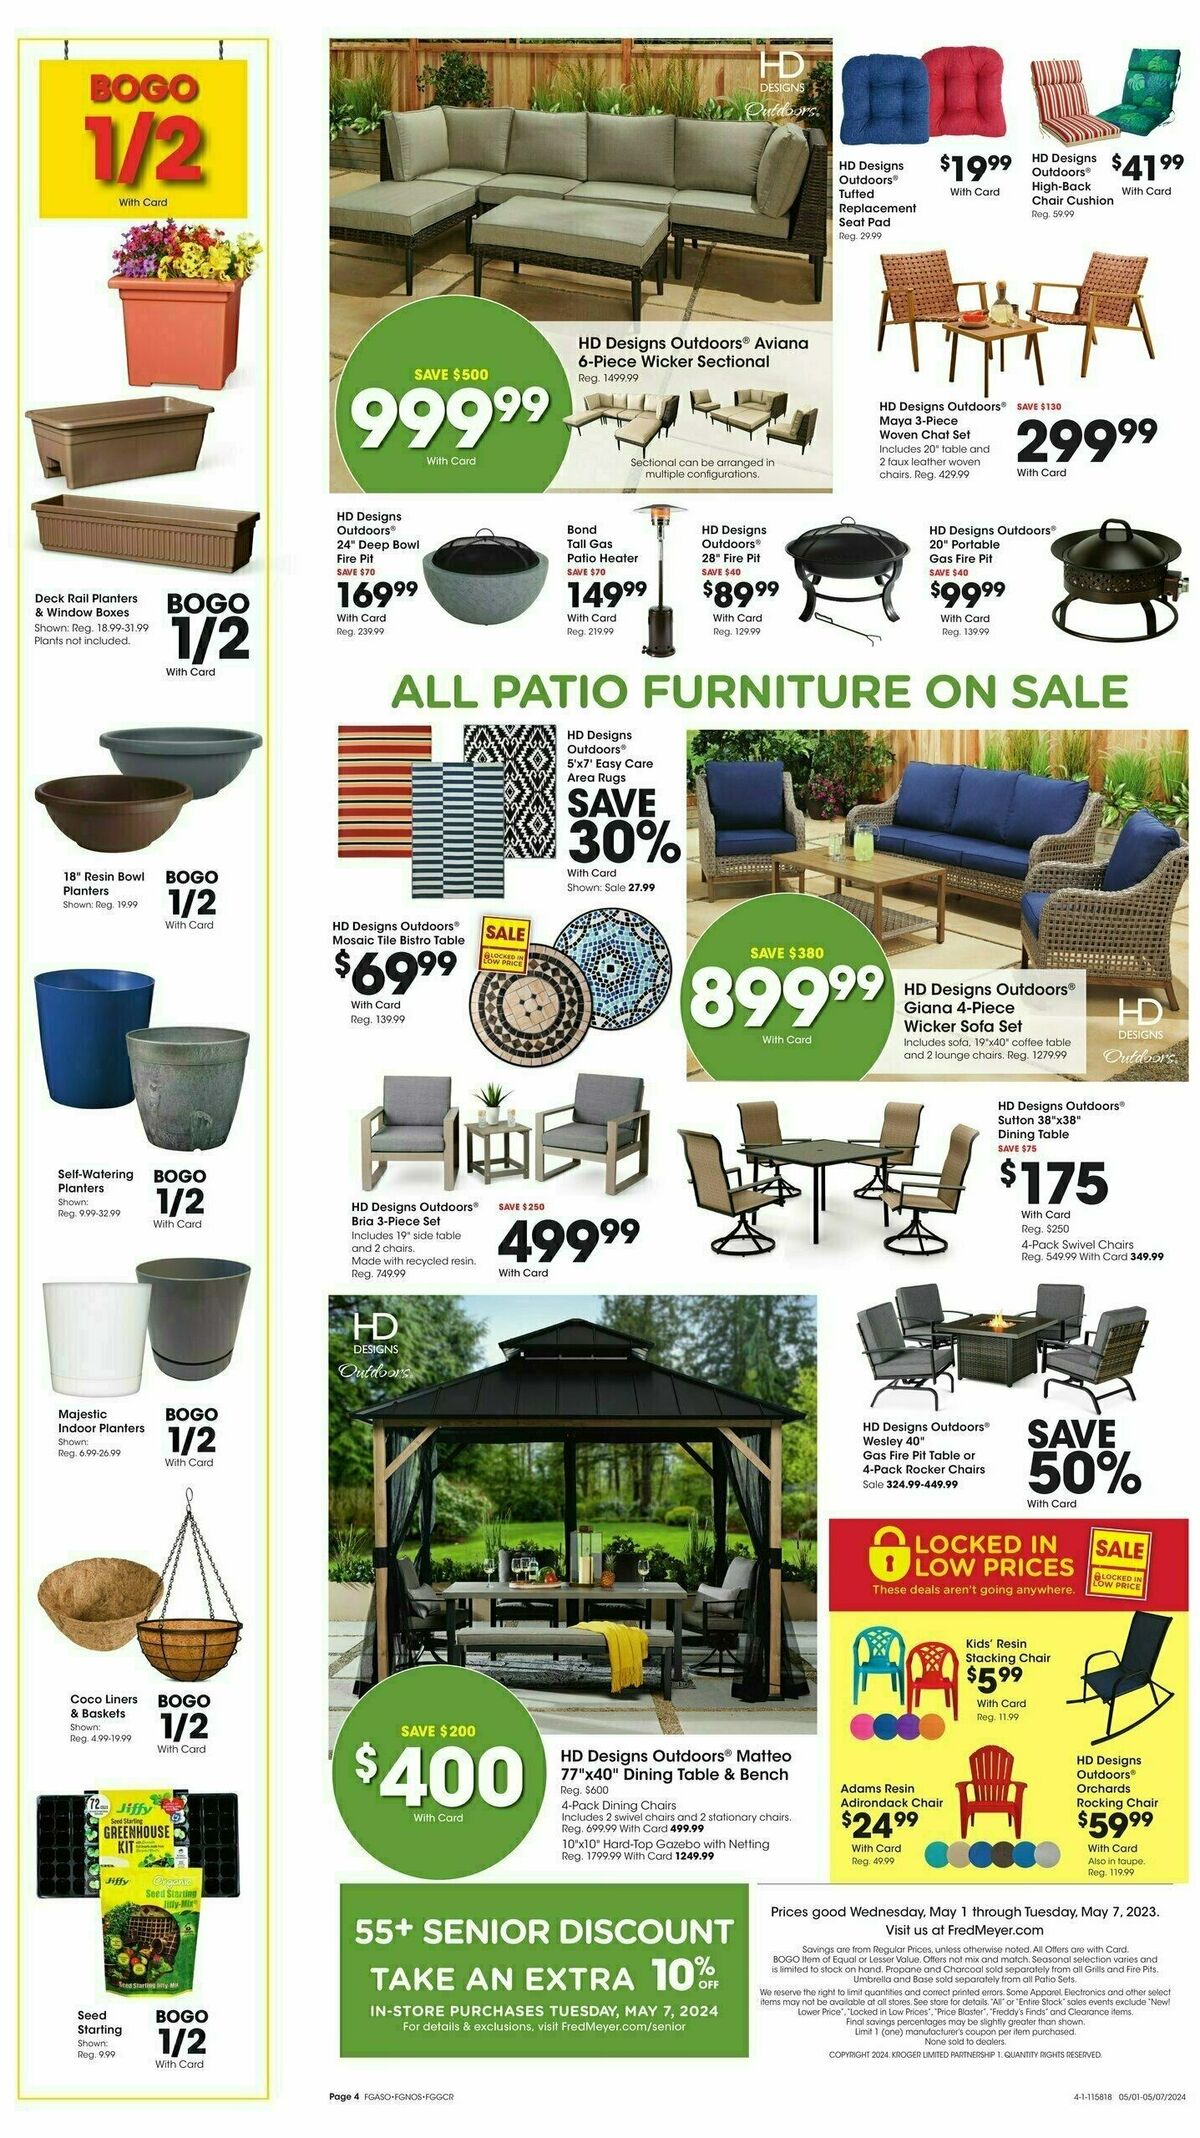 Fred Meyer Garden Center Weekly Ad from May 1